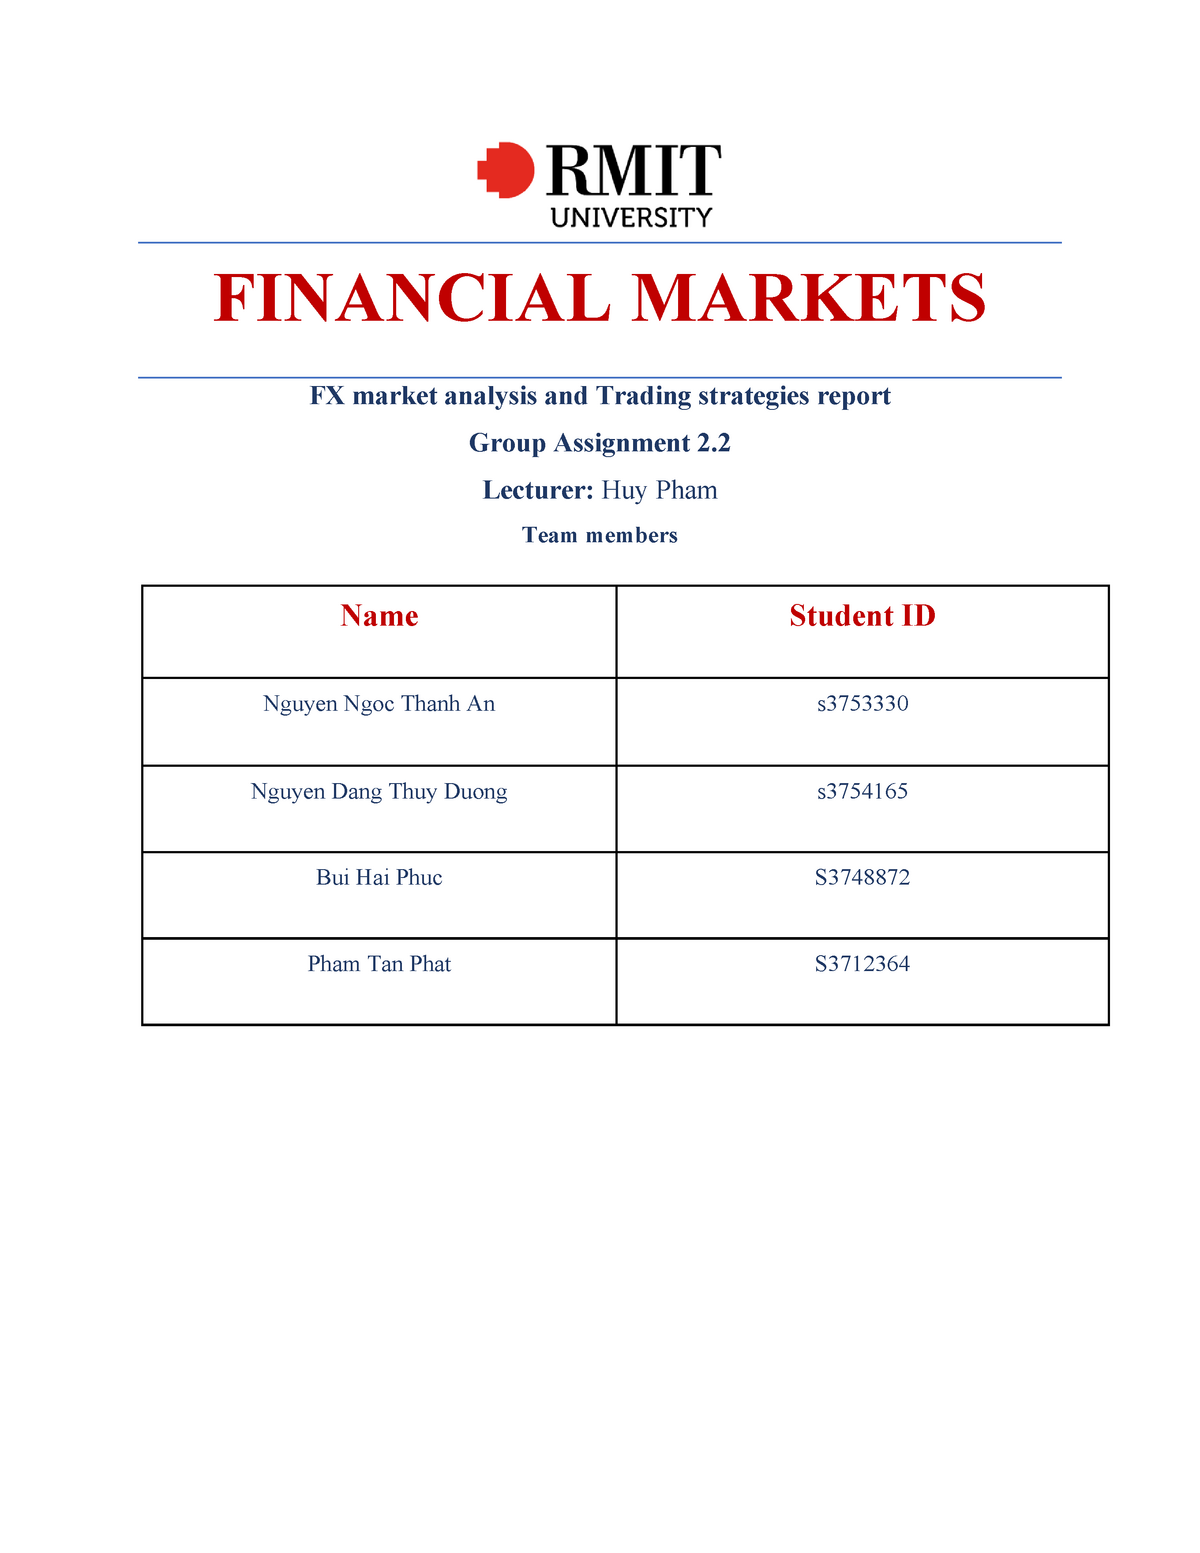 investing and financial markets assignment